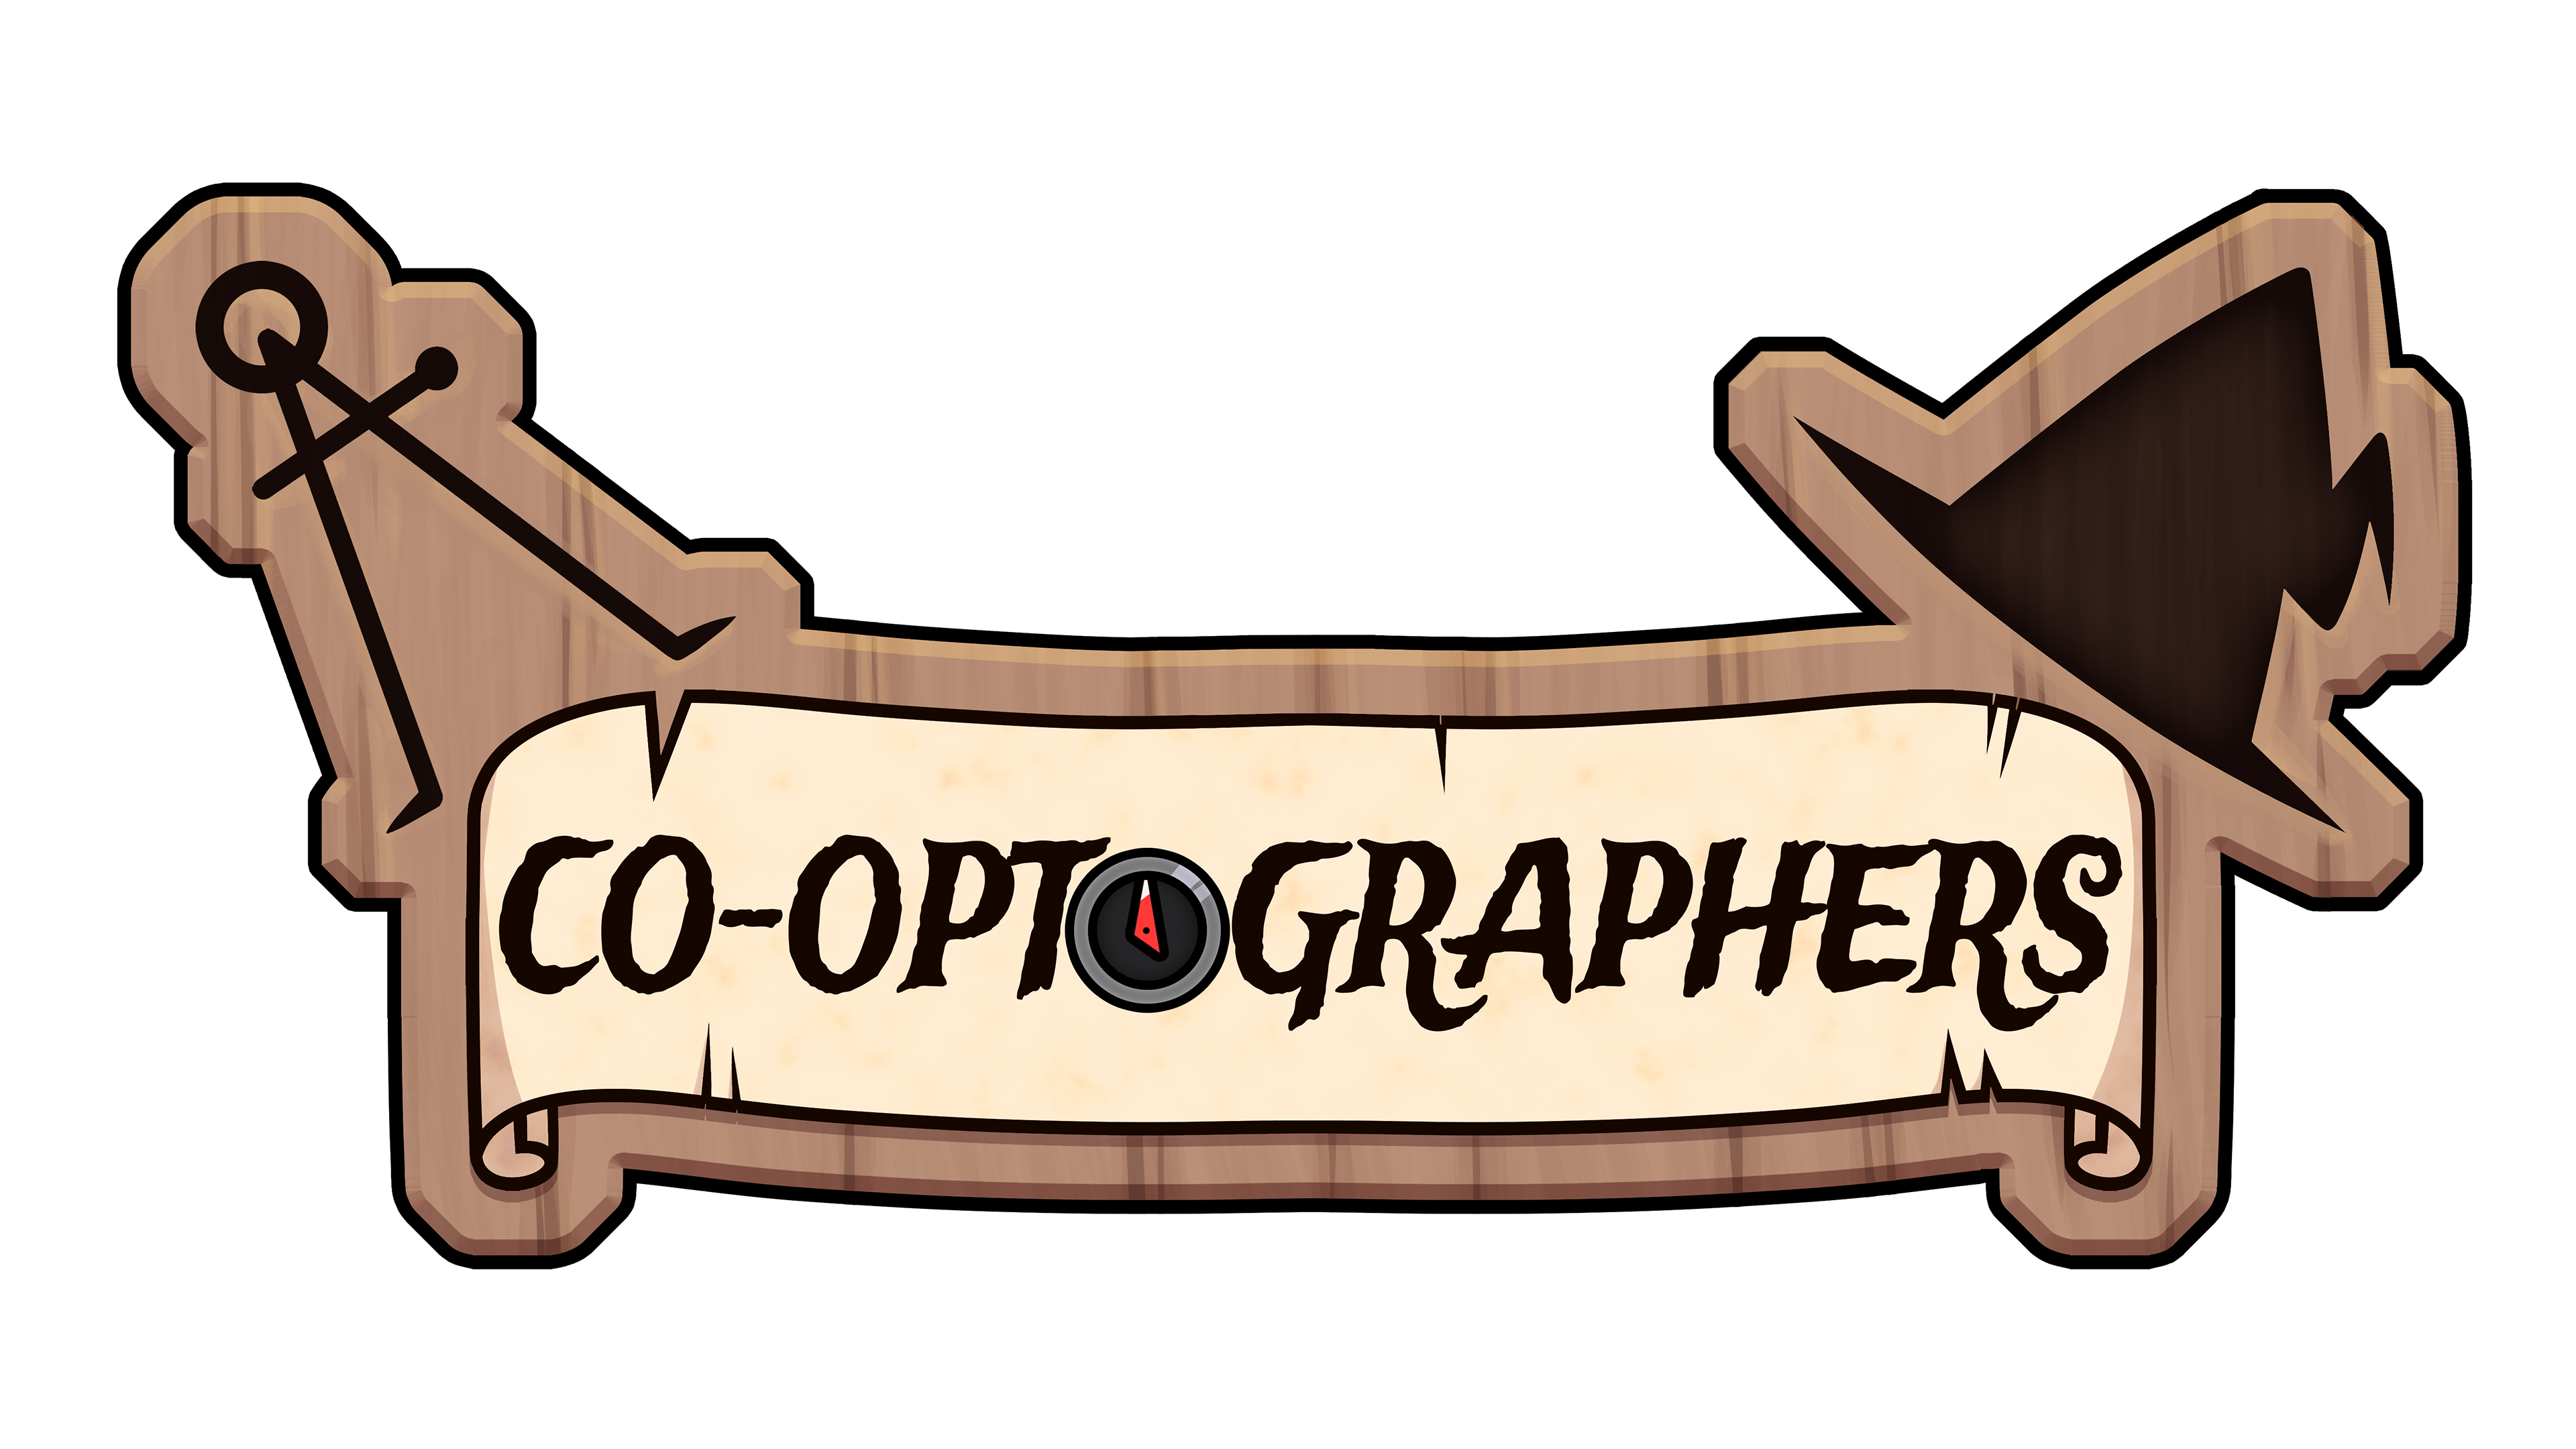 Co-optographers